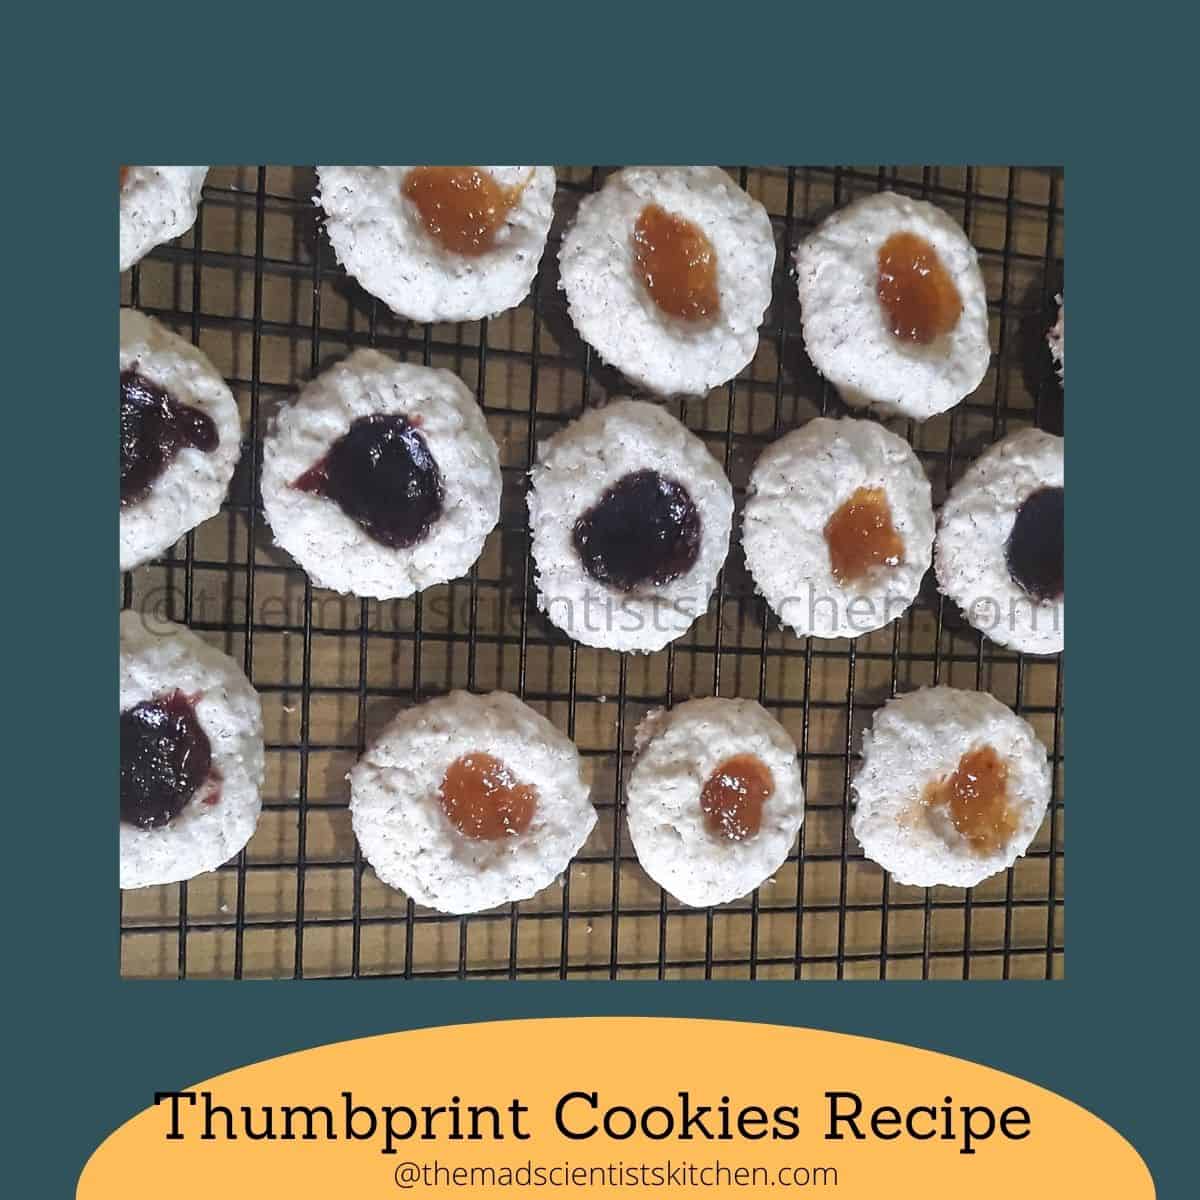 Thumbprint Cookies made with homemade peanut butter and oats.